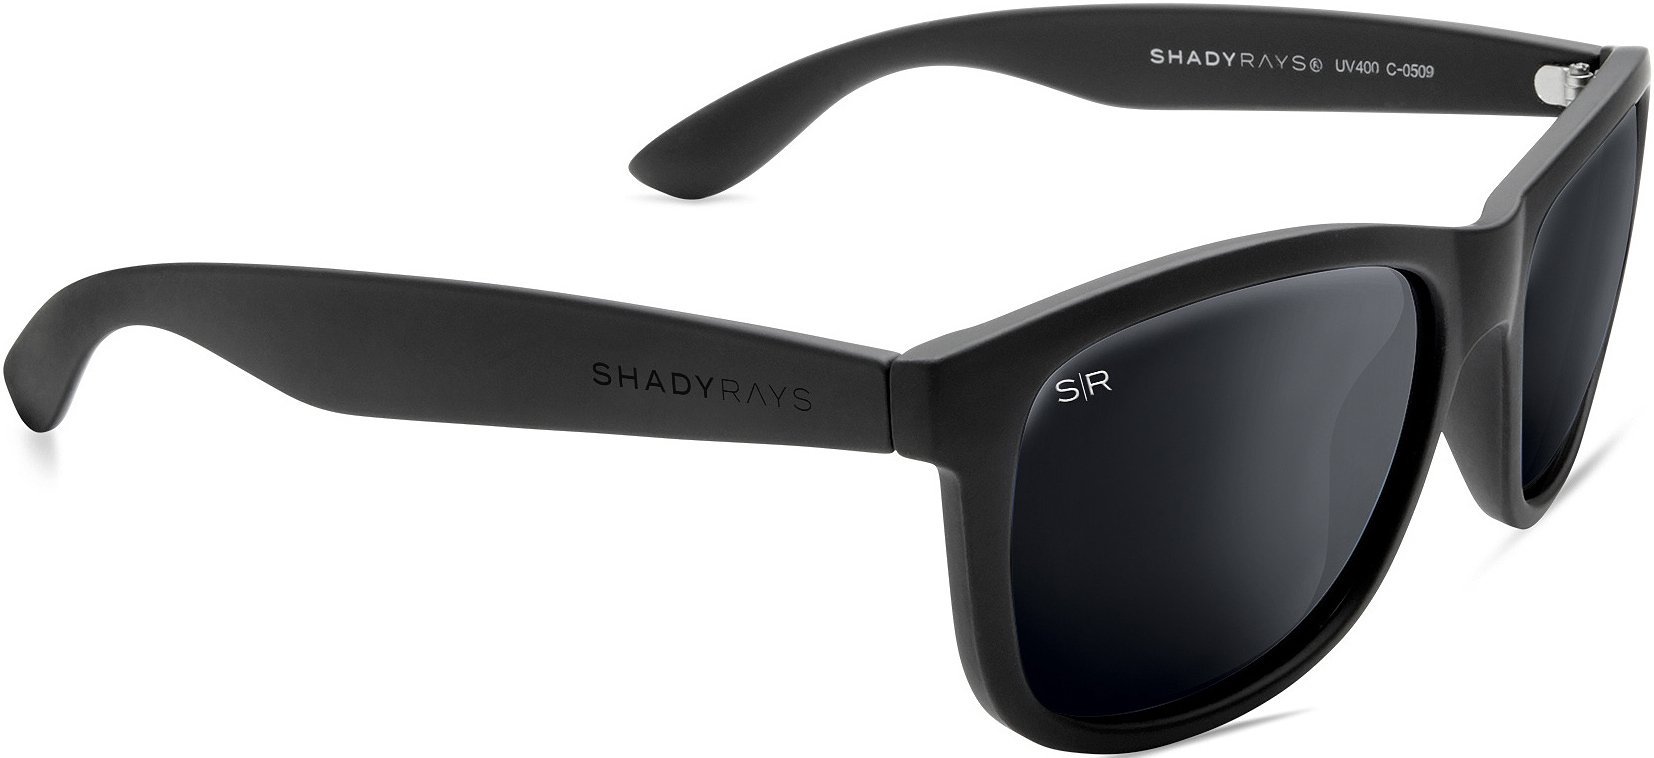 Signature Series - Blackout SR Pro Polarized INCOGNITO Sunglasses | Matte Black Sunglasses | Best Christmas Gifts | Gifts for the Holidays | Unique